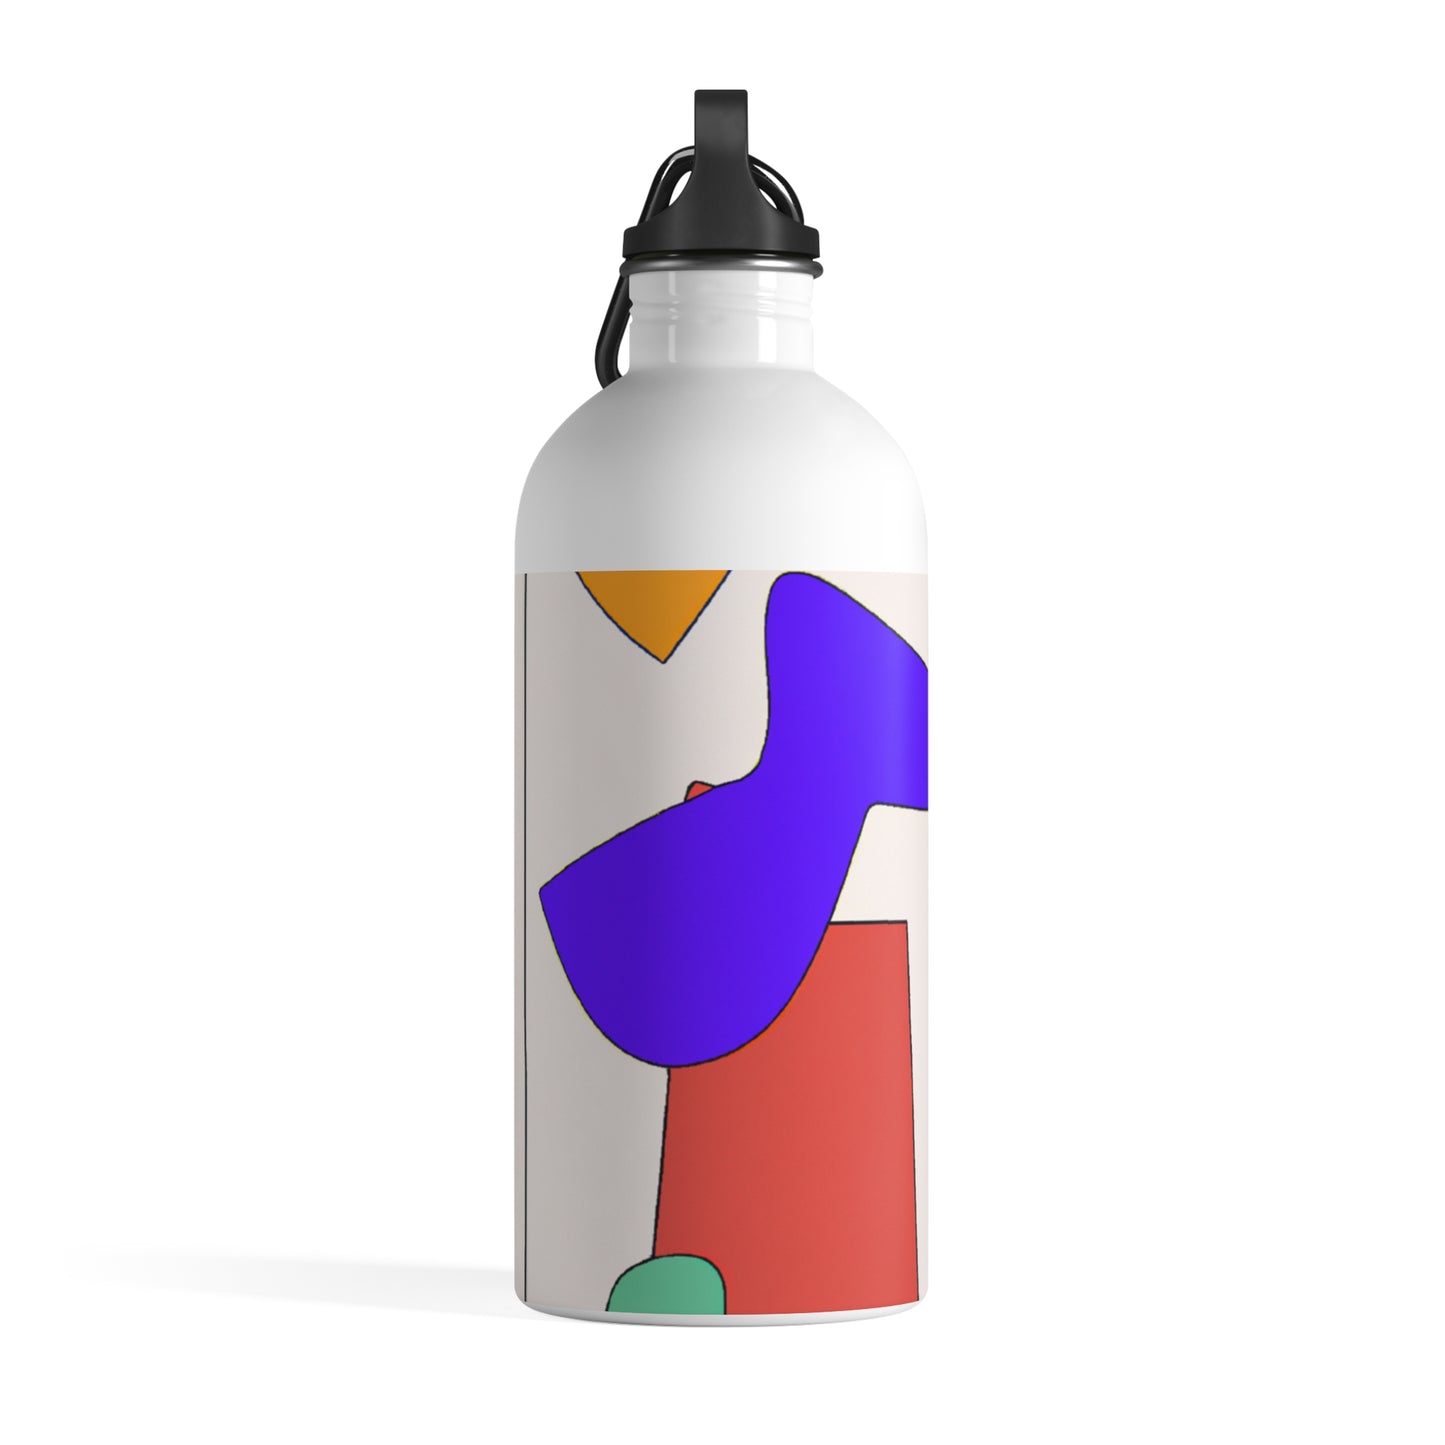 "A Beacon of Hope" - The Alien Stainless Steel Water Bottle